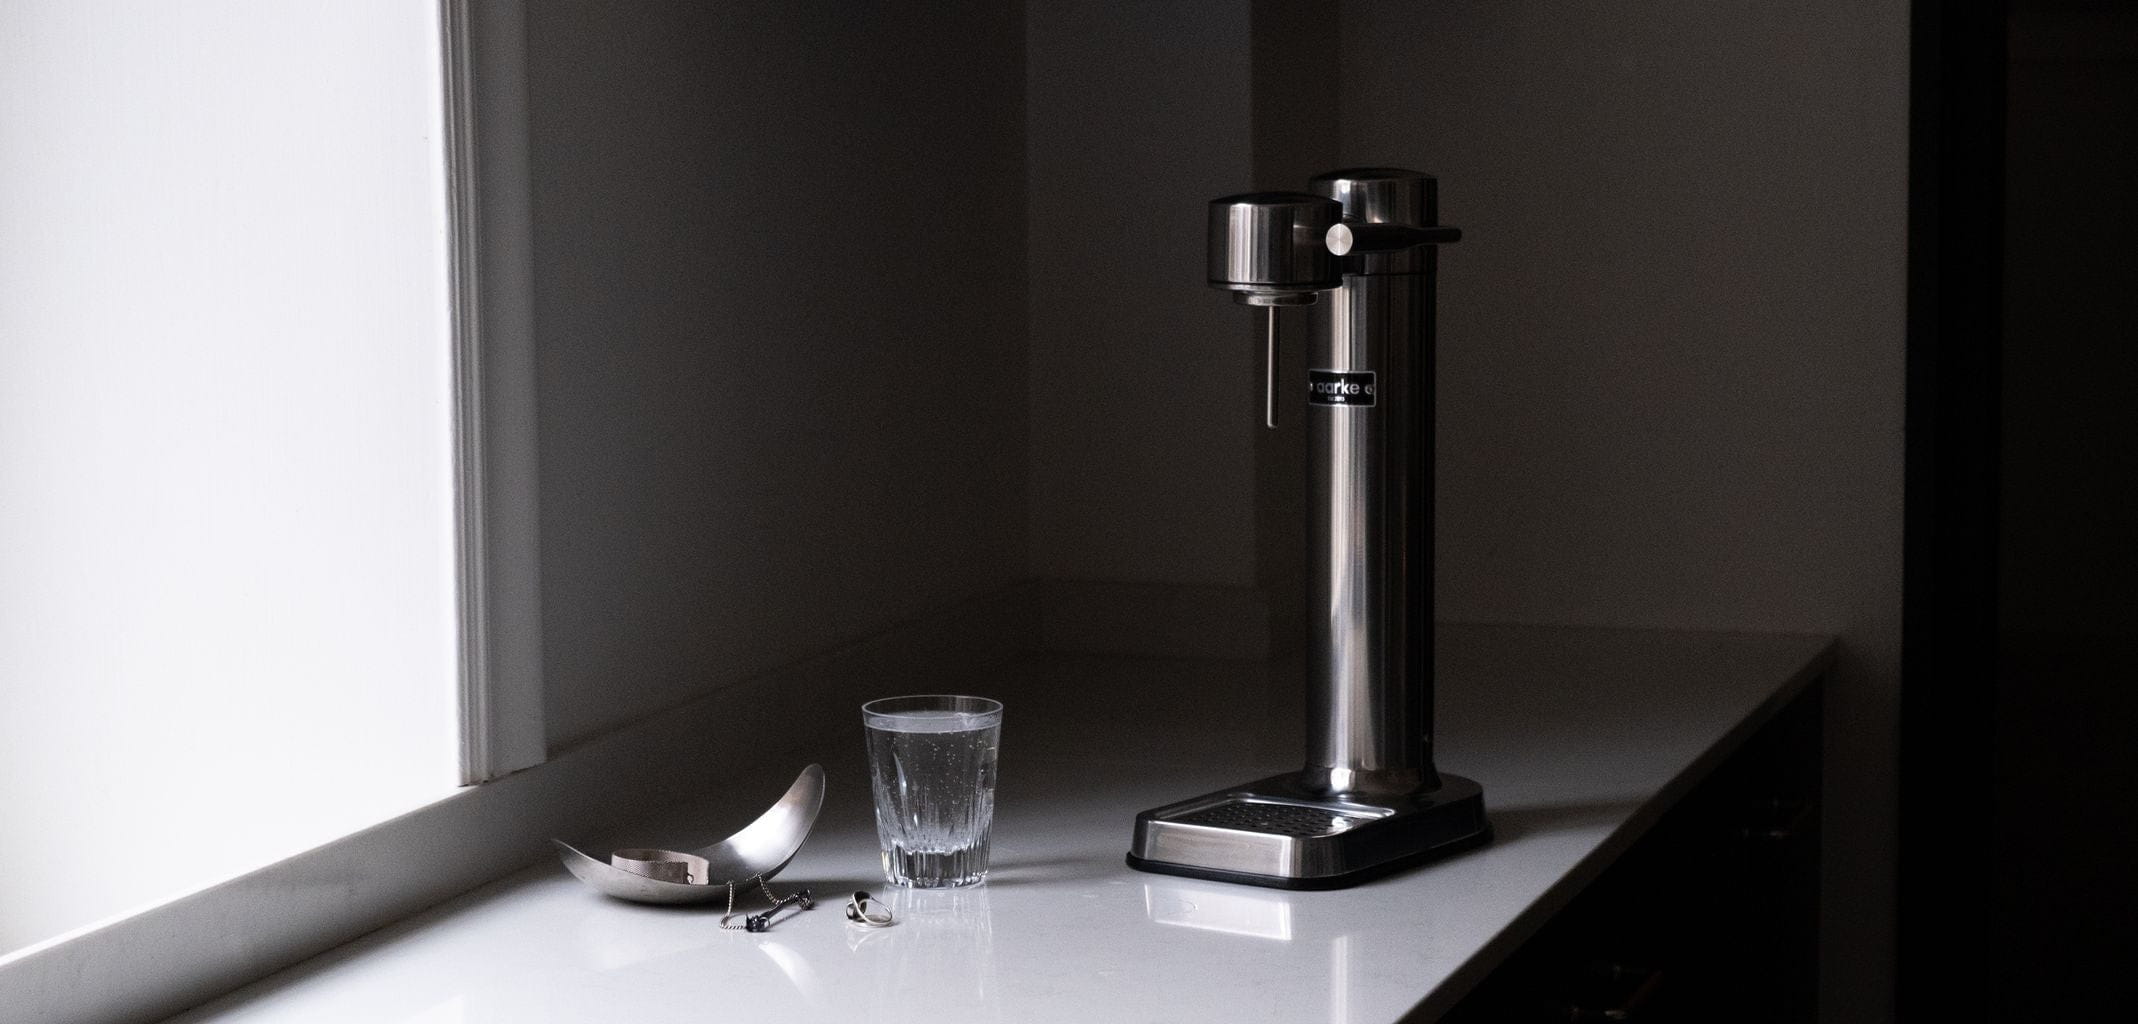 An Aarke Carbonator 3 Soda Maker, Polished Steel sits on a table next to a window.